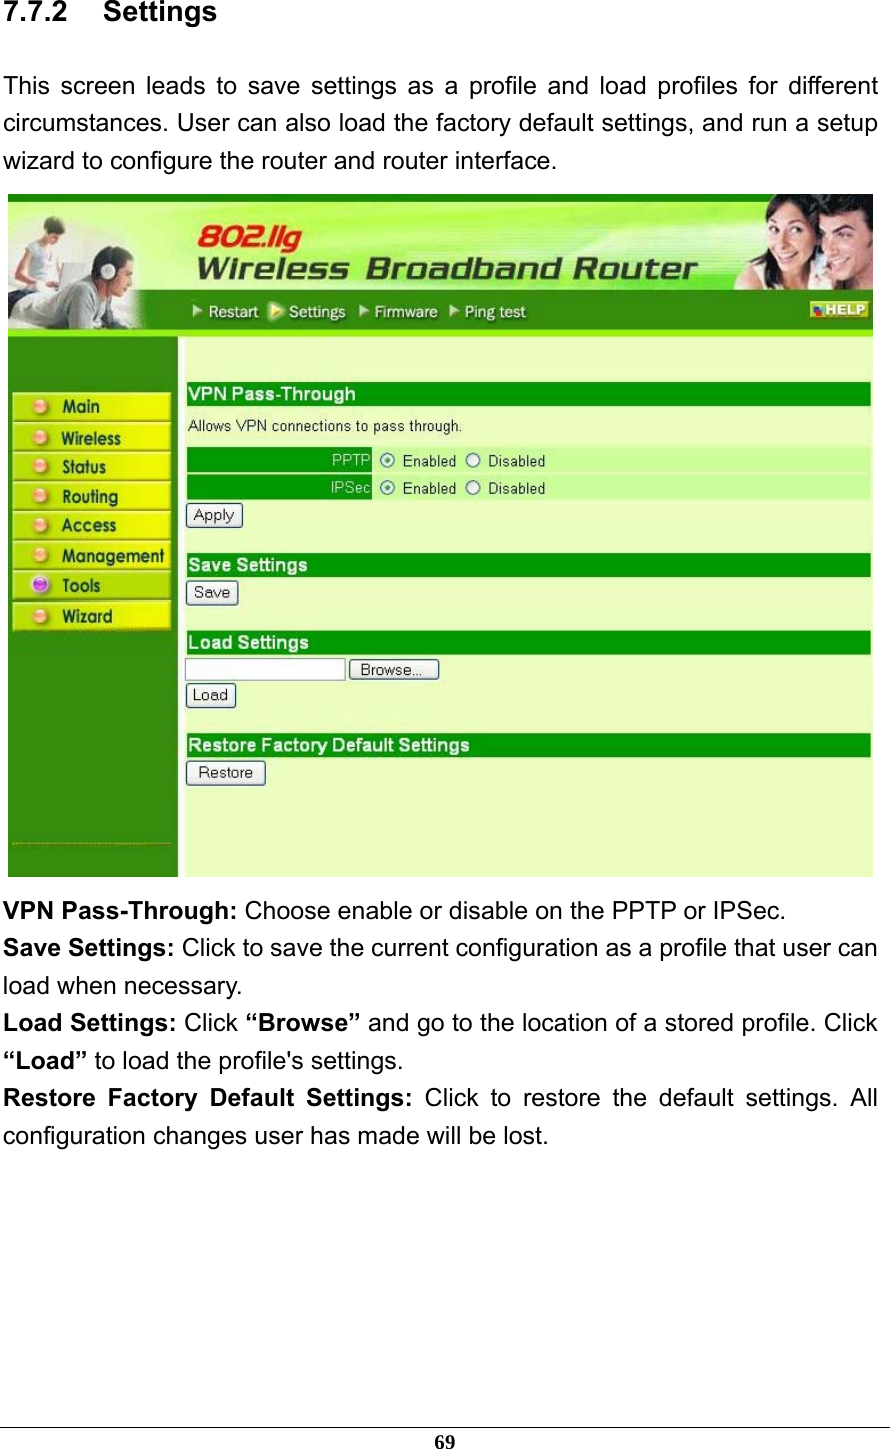 7.7.2 Settings This screen leads to save settings as a profile and load profiles for different circumstances. User can also load the factory default settings, and run a setup wizard to configure the router and router interface.  VPN Pass-Through: Choose enable or disable on the PPTP or IPSec. Save Settings: Click to save the current configuration as a profile that user can load when necessary. Load Settings: Click “Browse” and go to the location of a stored profile. Click “Load” to load the profile&apos;s settings. Restore Factory Default Settings: Click to restore the default settings. All configuration changes user has made will be lost.  69 